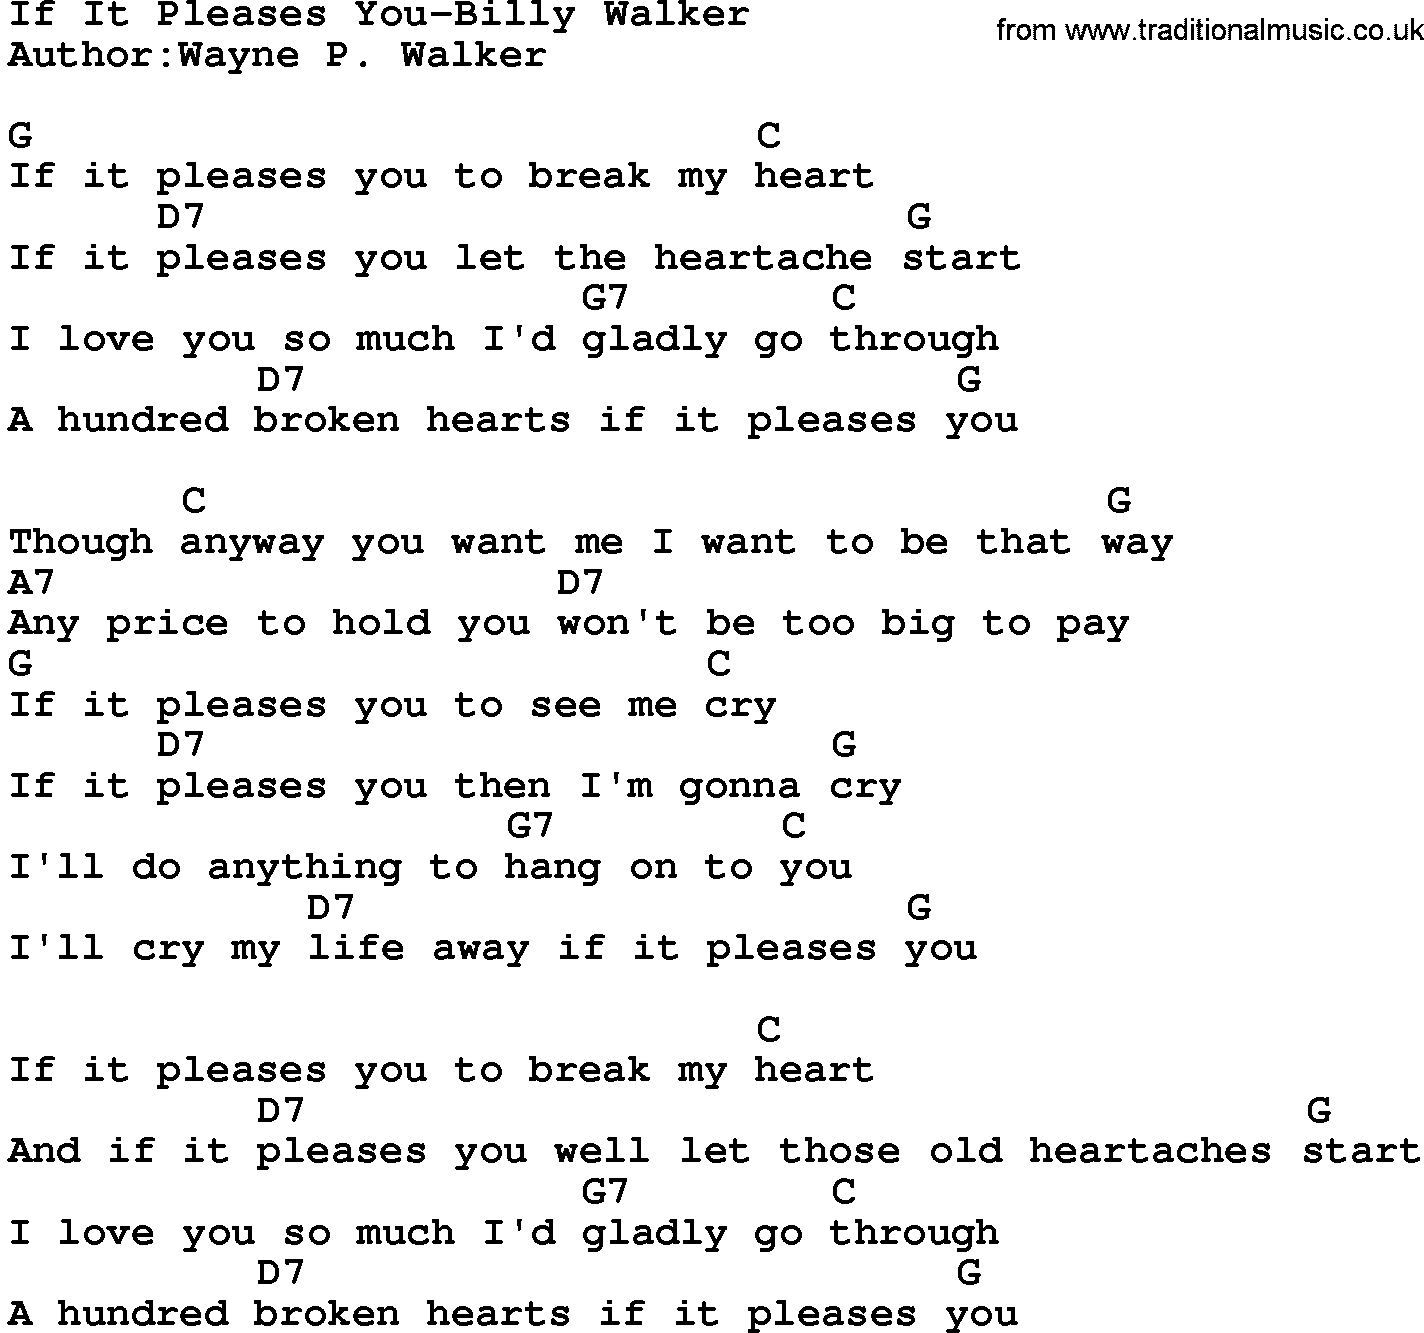 Country music song: If It Pleases You-Billy Walker lyrics and chords